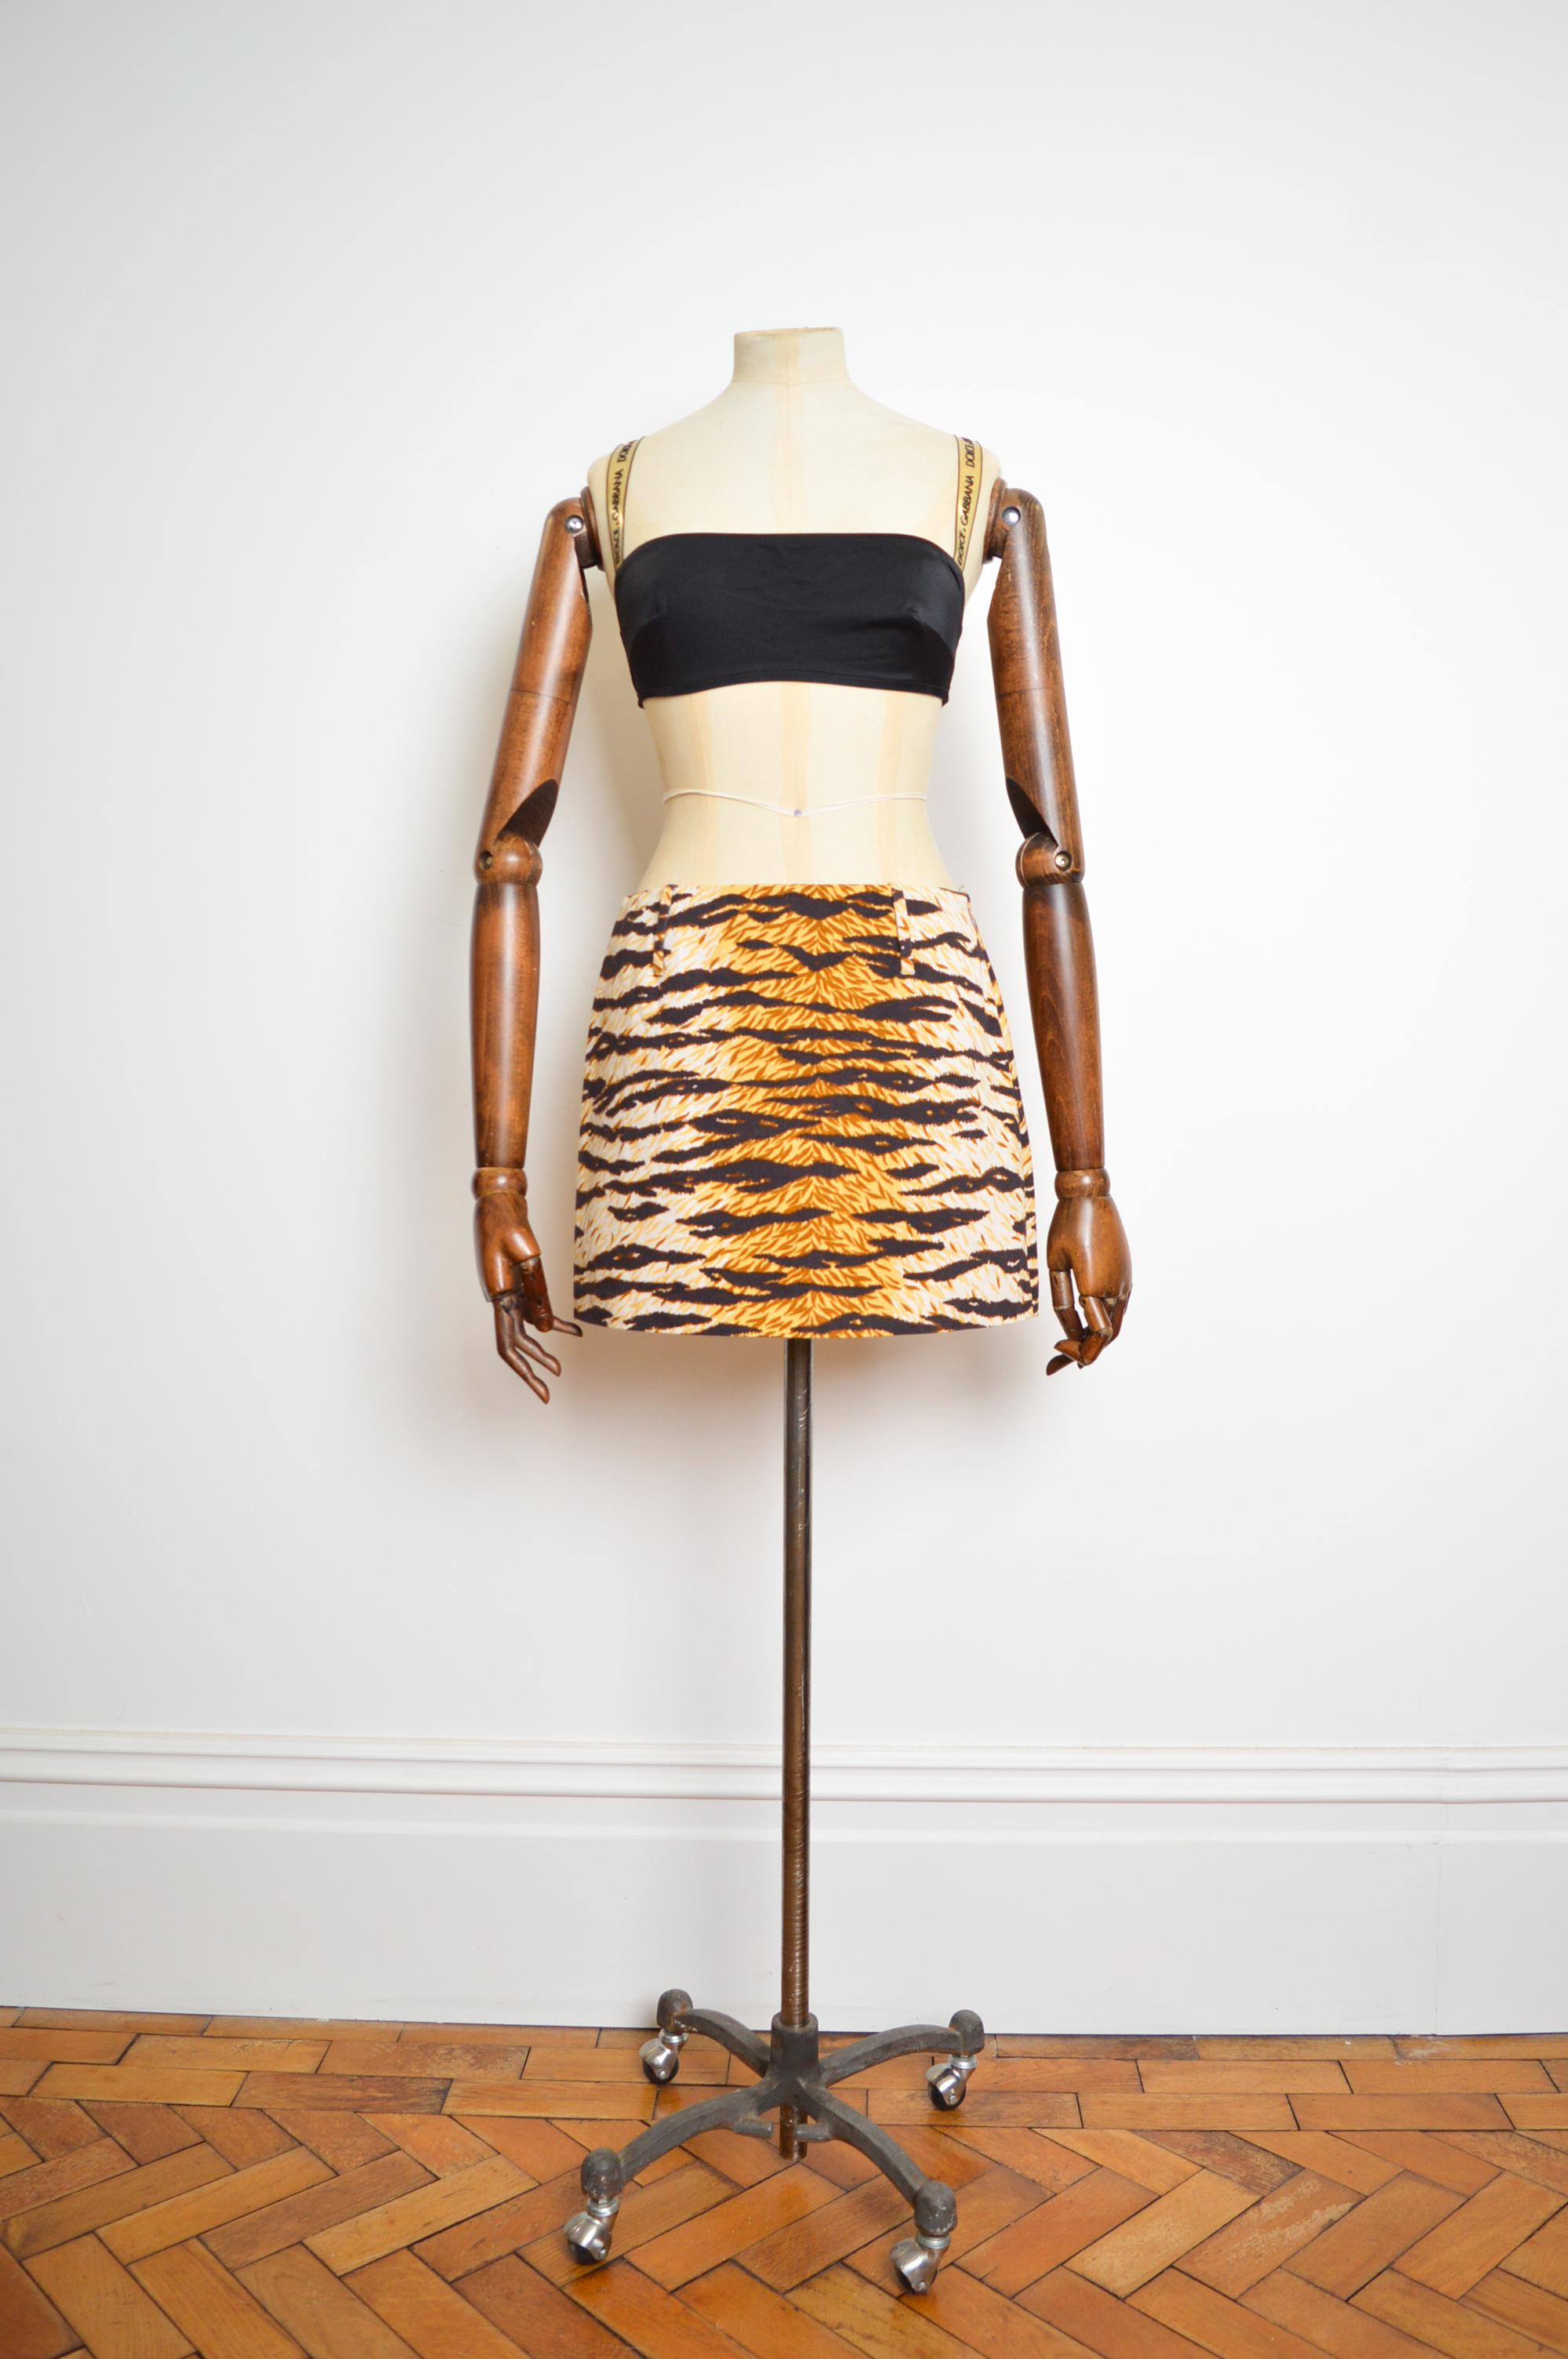 Funky Vintage Y2k, Mid-rise Dolce & Gabbana Mini skirt crafted from a Tiger printed Cotton.  

MADE IN ITALY.  

Zip up side closure closure 
Large Belt Loops 
Archive Print

100% Cotton

Sizing given in inches ; 
Waist/Hip : 28